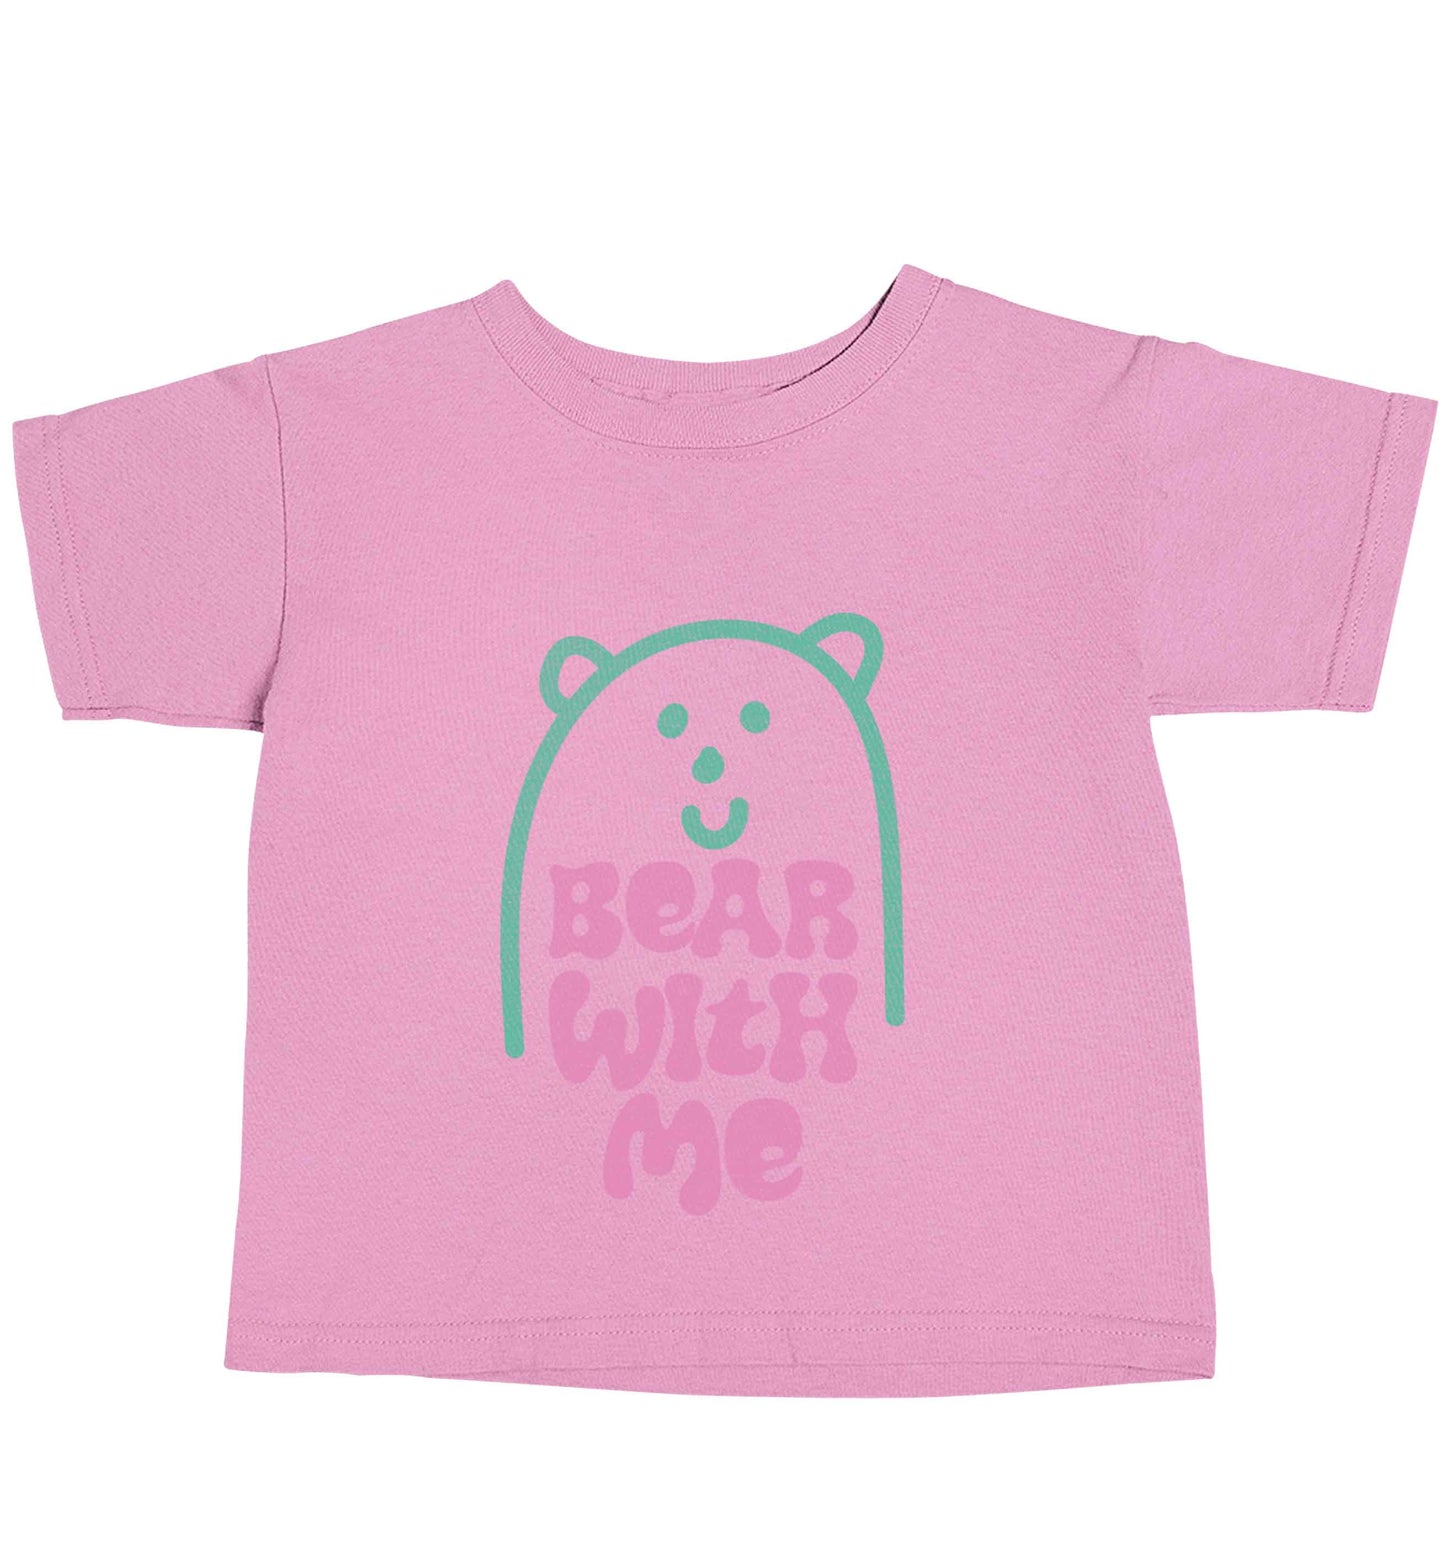 Bear With Me Kit light pink baby toddler Tshirt 2 Years